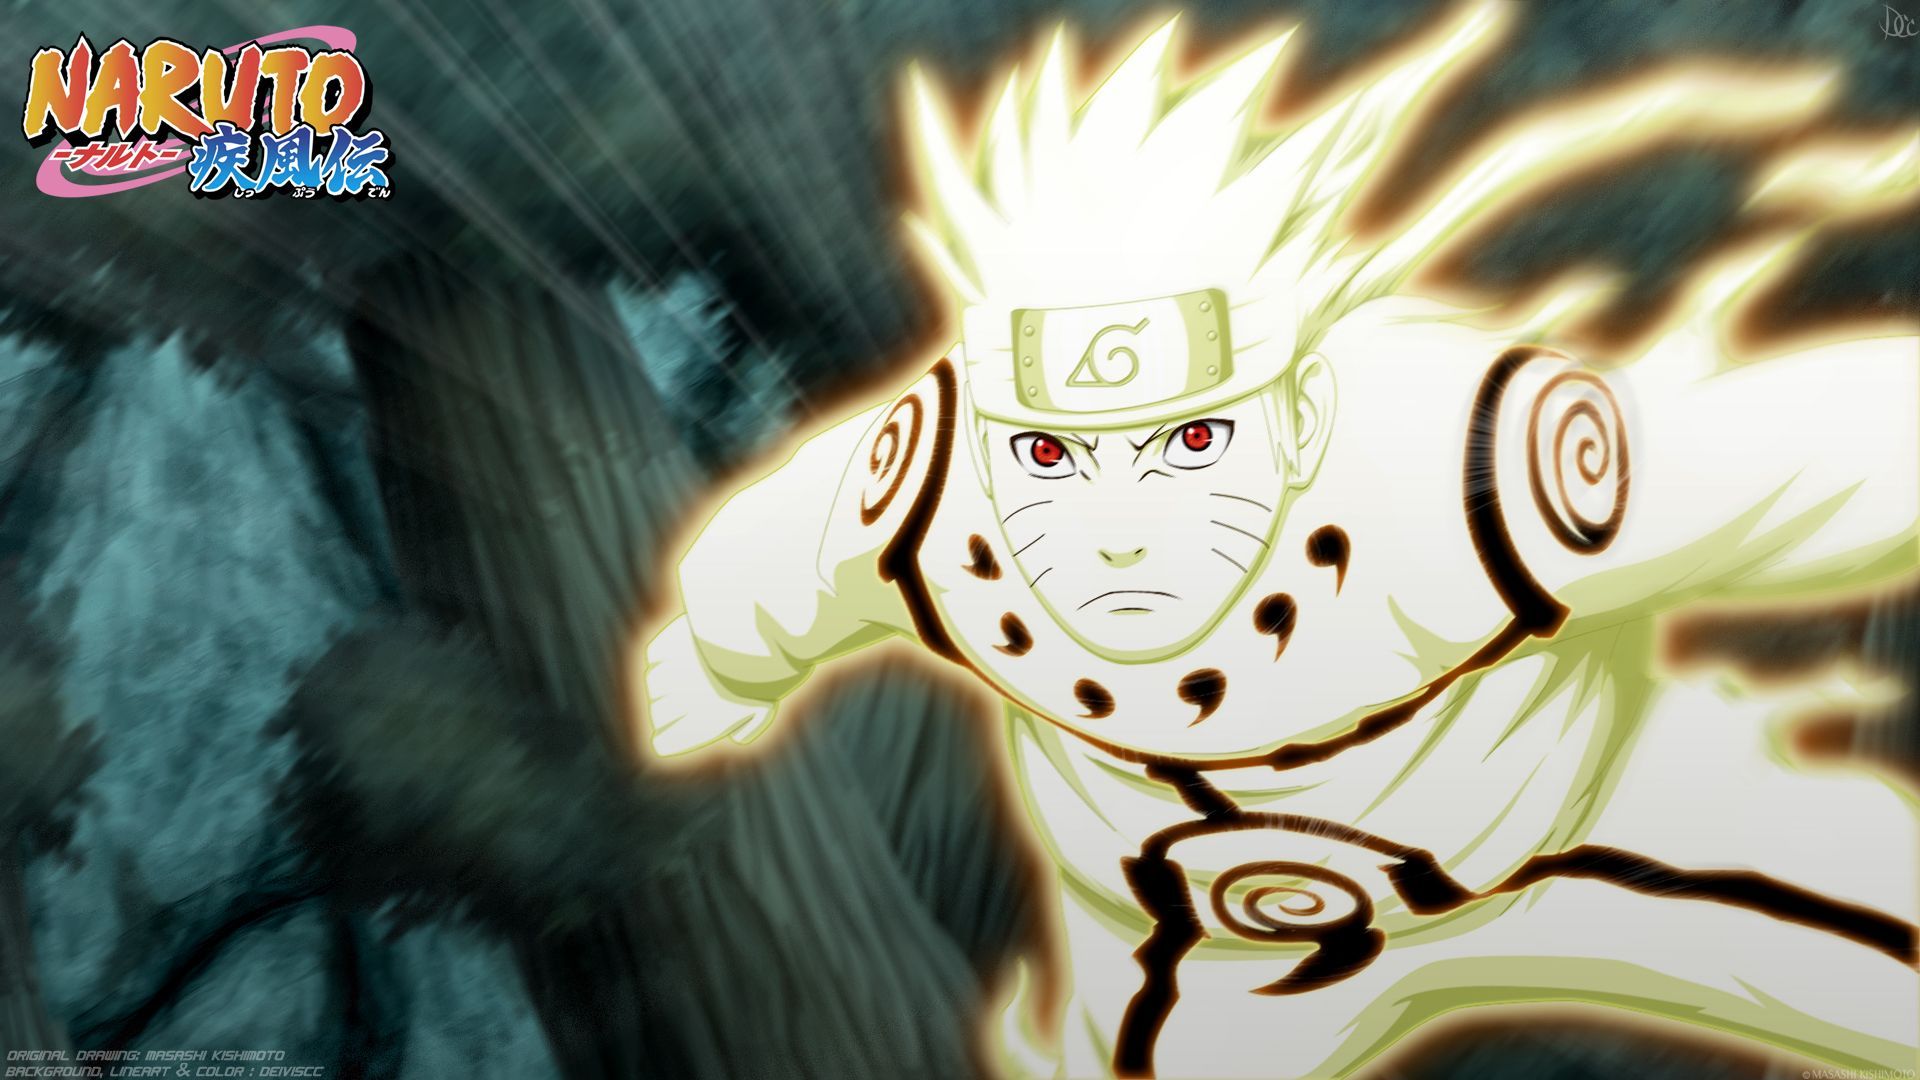 Naruto Shippuden wallpapers HD Wallpapers, Backgrounds, Images